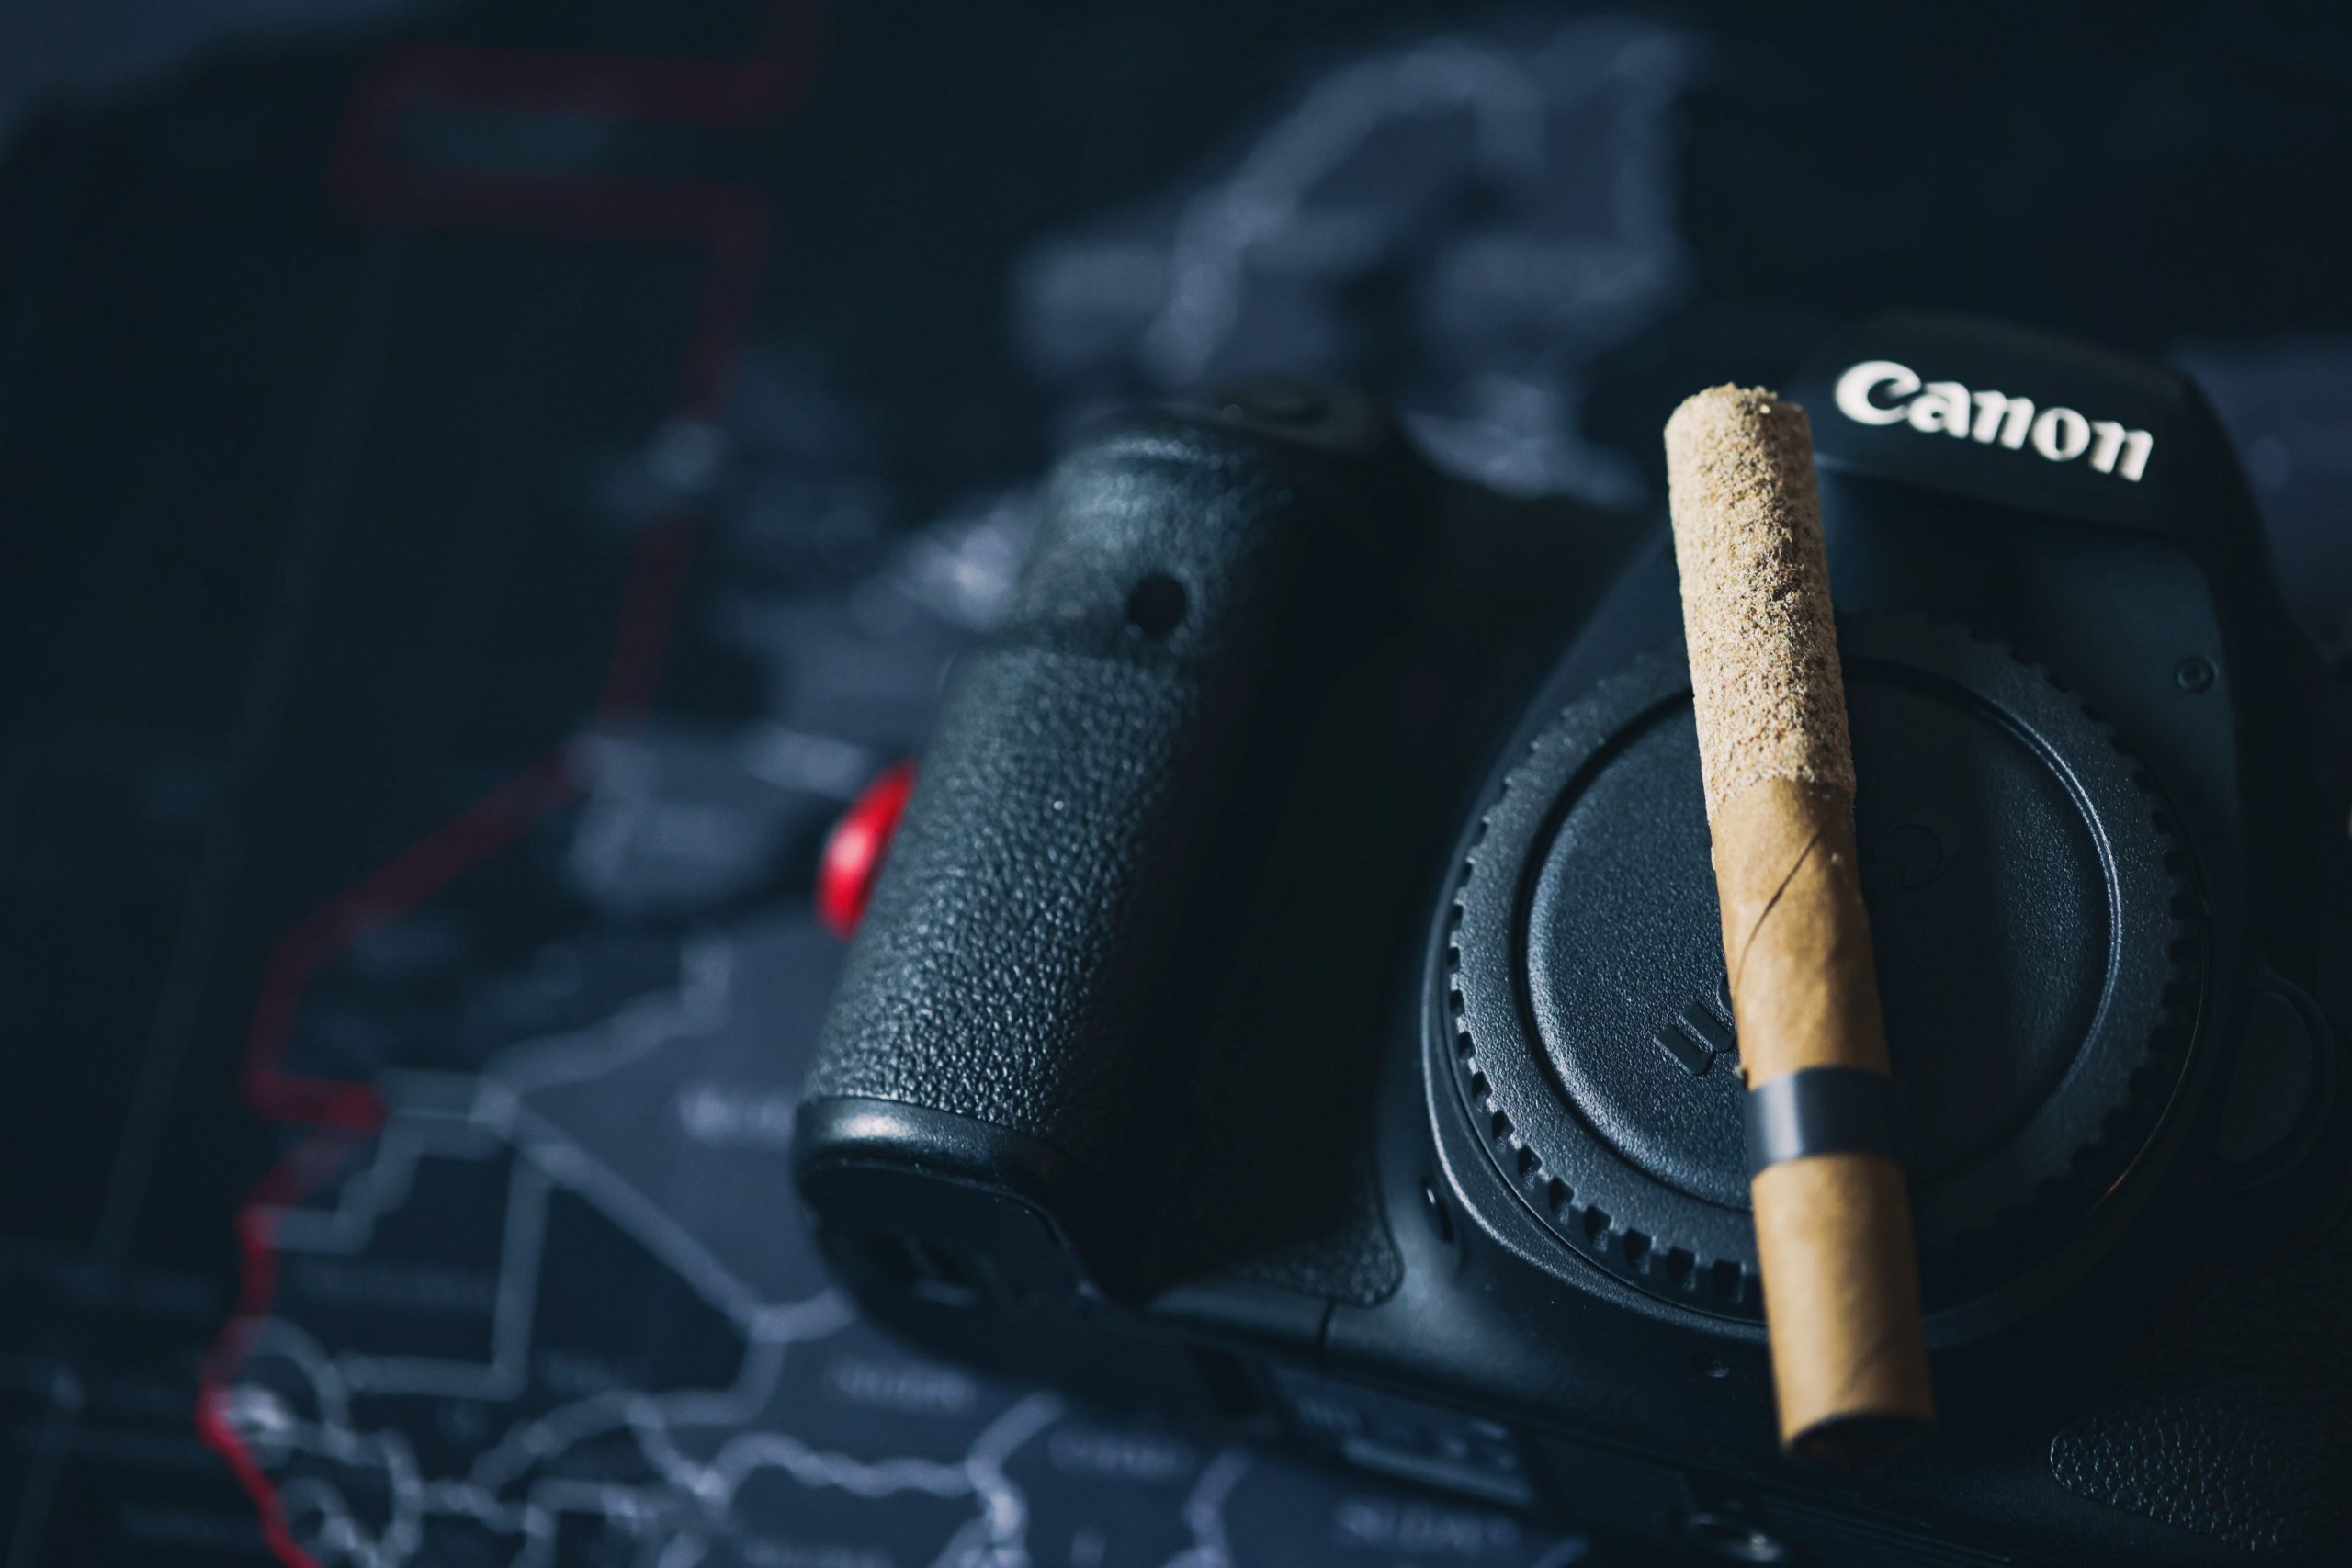 Camera and cannabis product for use to create cannabis content for social media